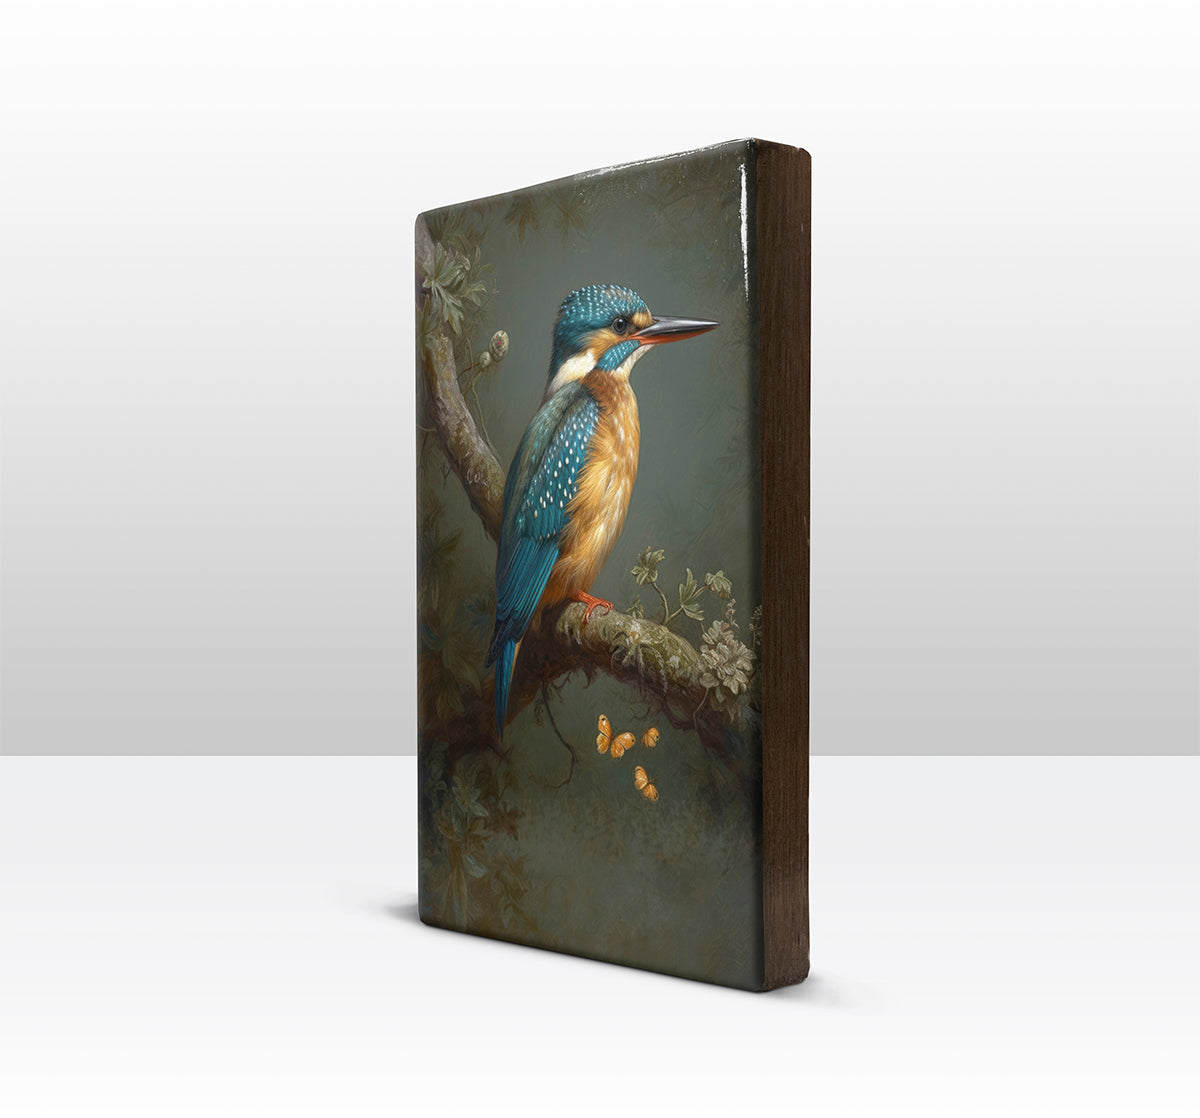 Laque print - Kingfisher with butterflies - Hand lacquered - 19.5 x 30 cm - LP373